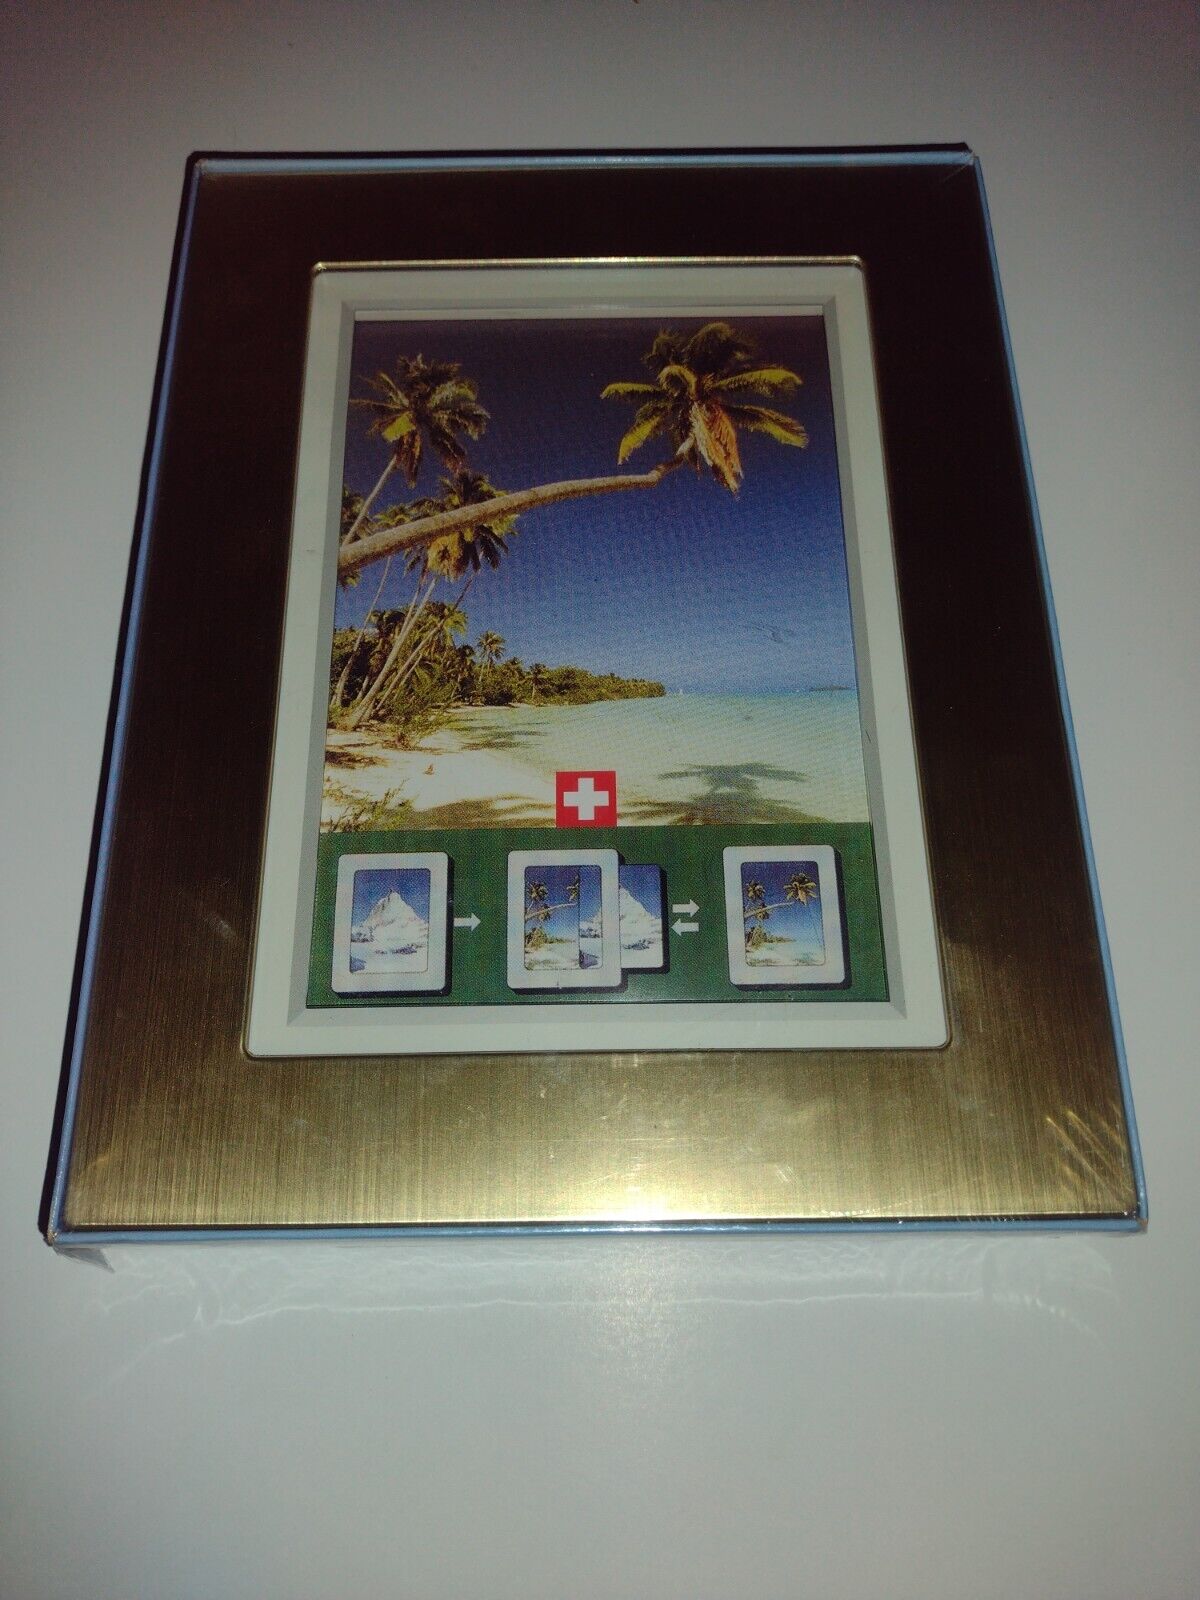 Pictures in Motion Frame Made In Switzerland -Holds (35) 4x6 Photos- New In Pkg